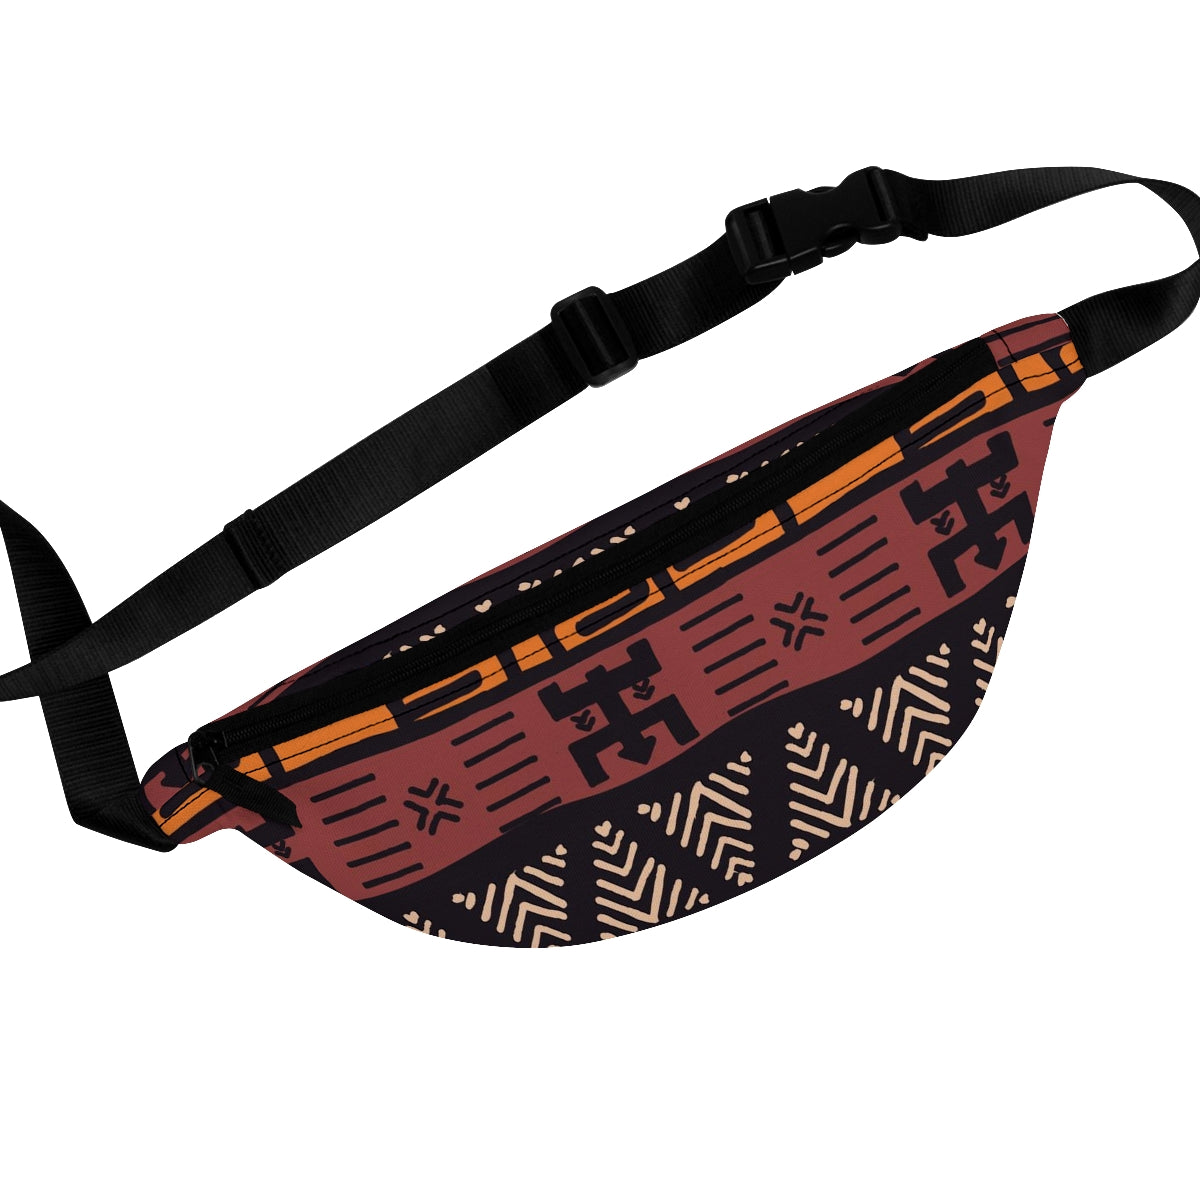 Mudcloth Pattern Brown Fanny Pack